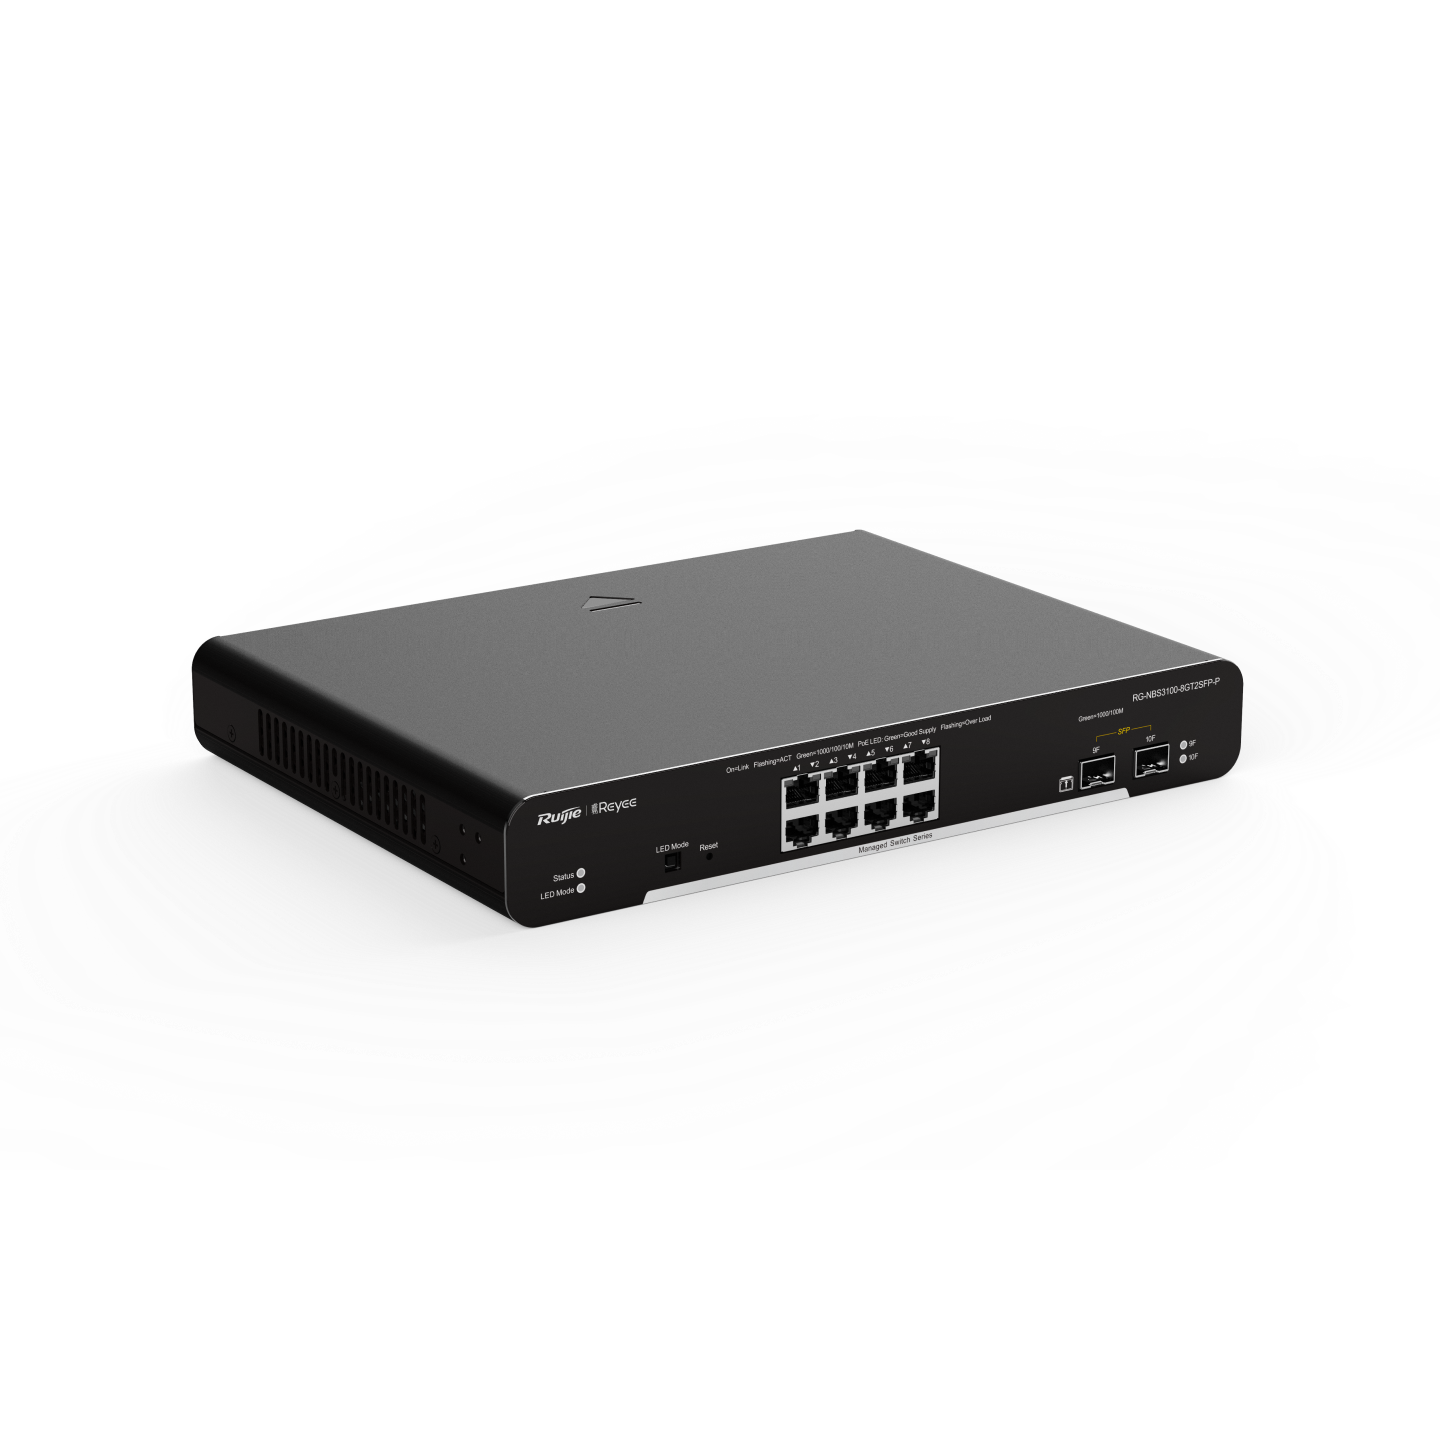 Reyee RG-NBS3100-8GT2SFP-P, 8 Port Giga POE+ 125W with 2 SFP Port, Layer 2 Cloud Managed Switch